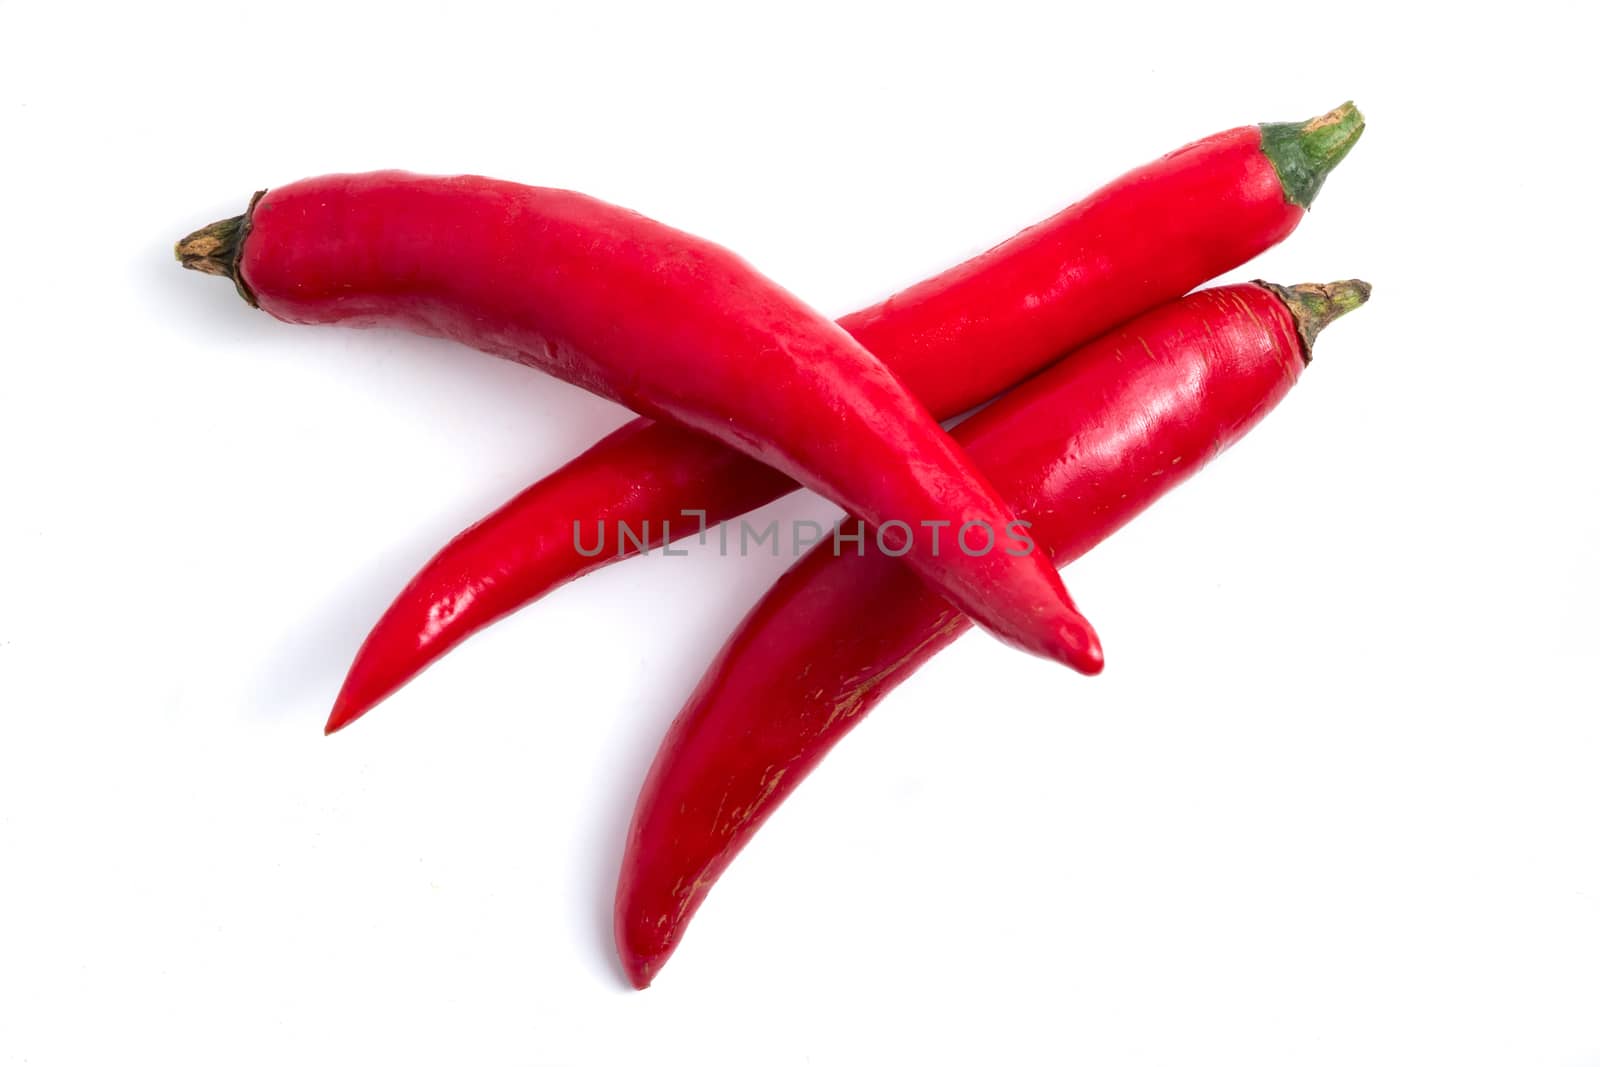 Fresh Red chili papper on white background.